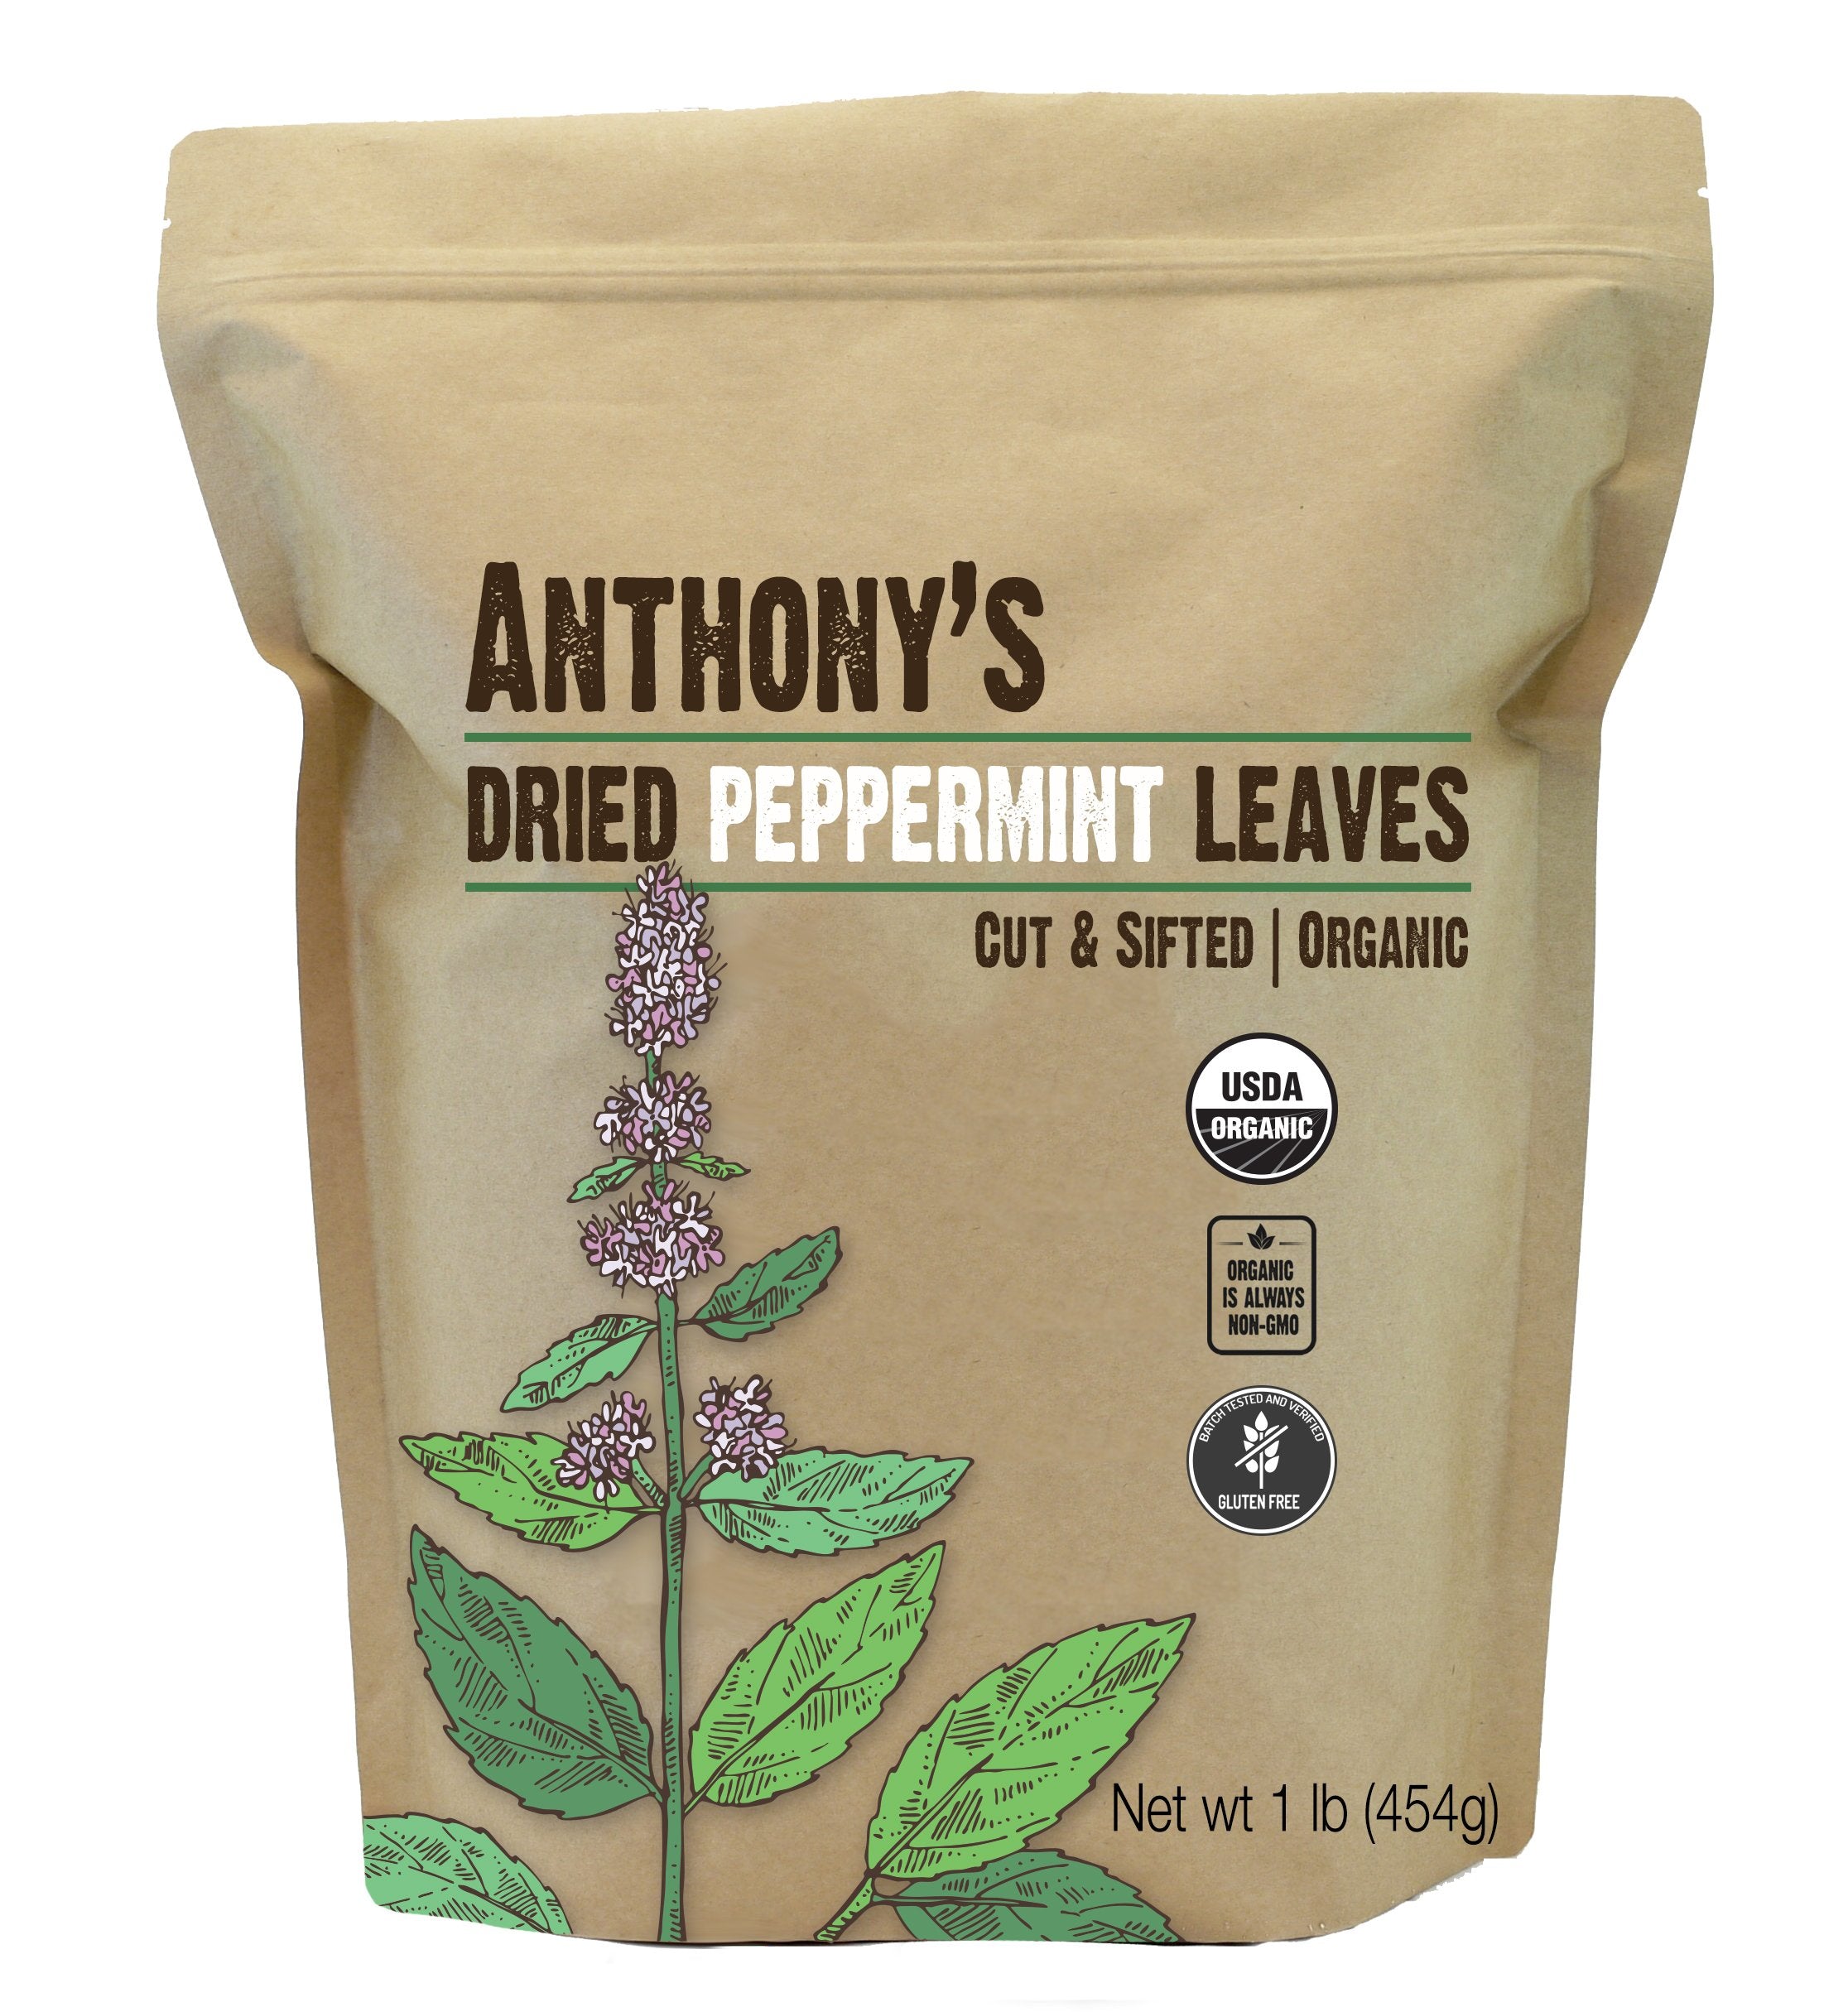 Peppermint Leaves: USDA Organic, Batch Tested Gluten Free, Cut & Sifted